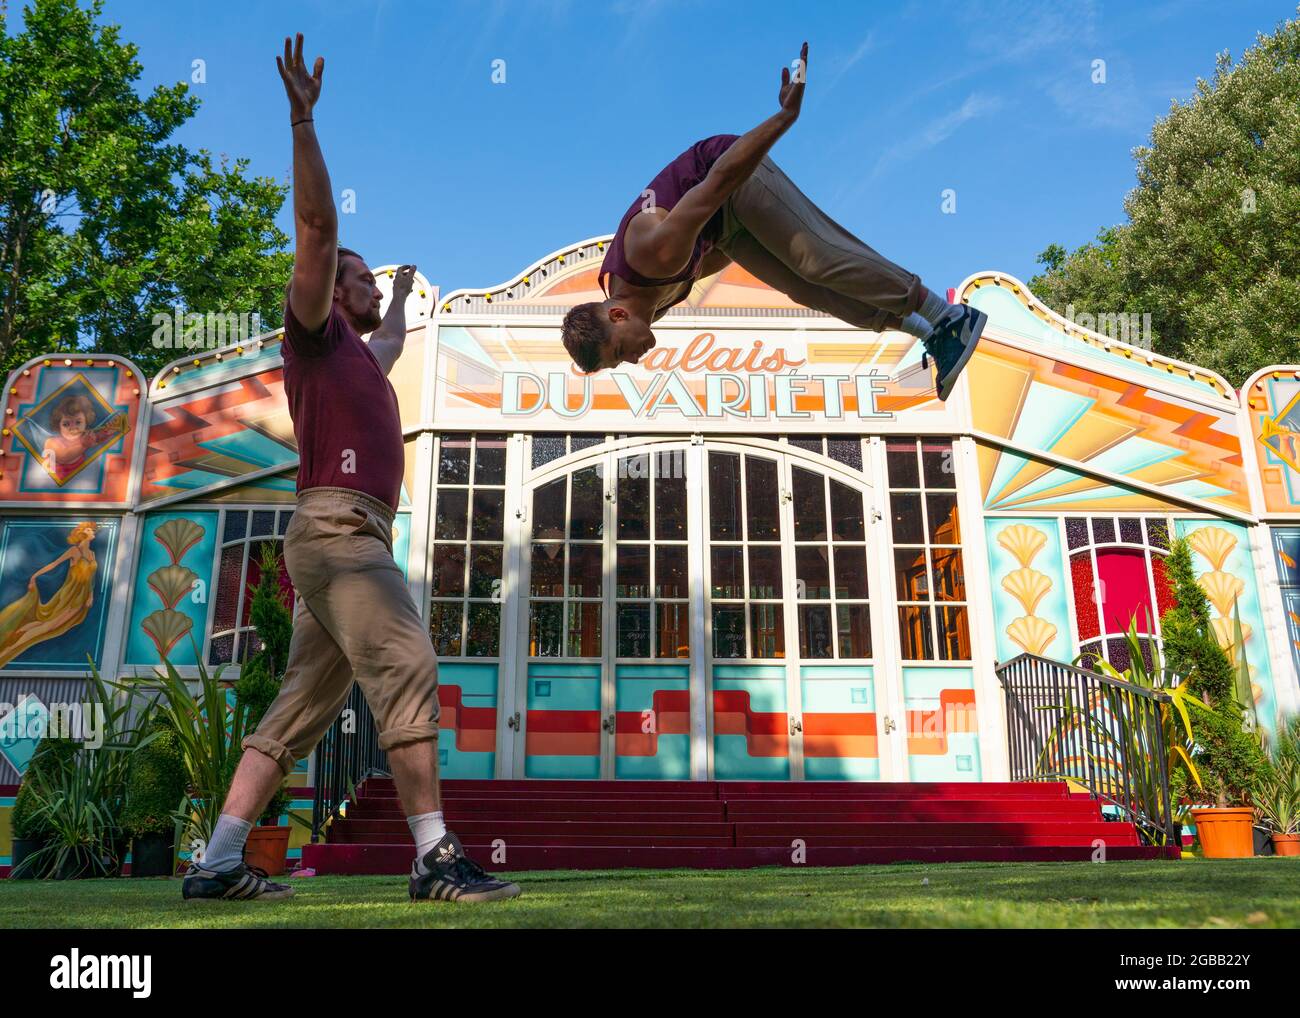 Edinburgh, Scotland, UK. 3 August  2021.  Performers from the experimental acrobatic circus company Barely Methodical Troupe perform outside the Palais du Variété Spiegeltent in George Square Gardens to kick off the Assembly Festival’s summer Fringe programme. The Troupe are performing their cutting edge show Bromance that wittily explores male companionship and its limits. Iain Masterton/Alamy Live news. Stock Photo